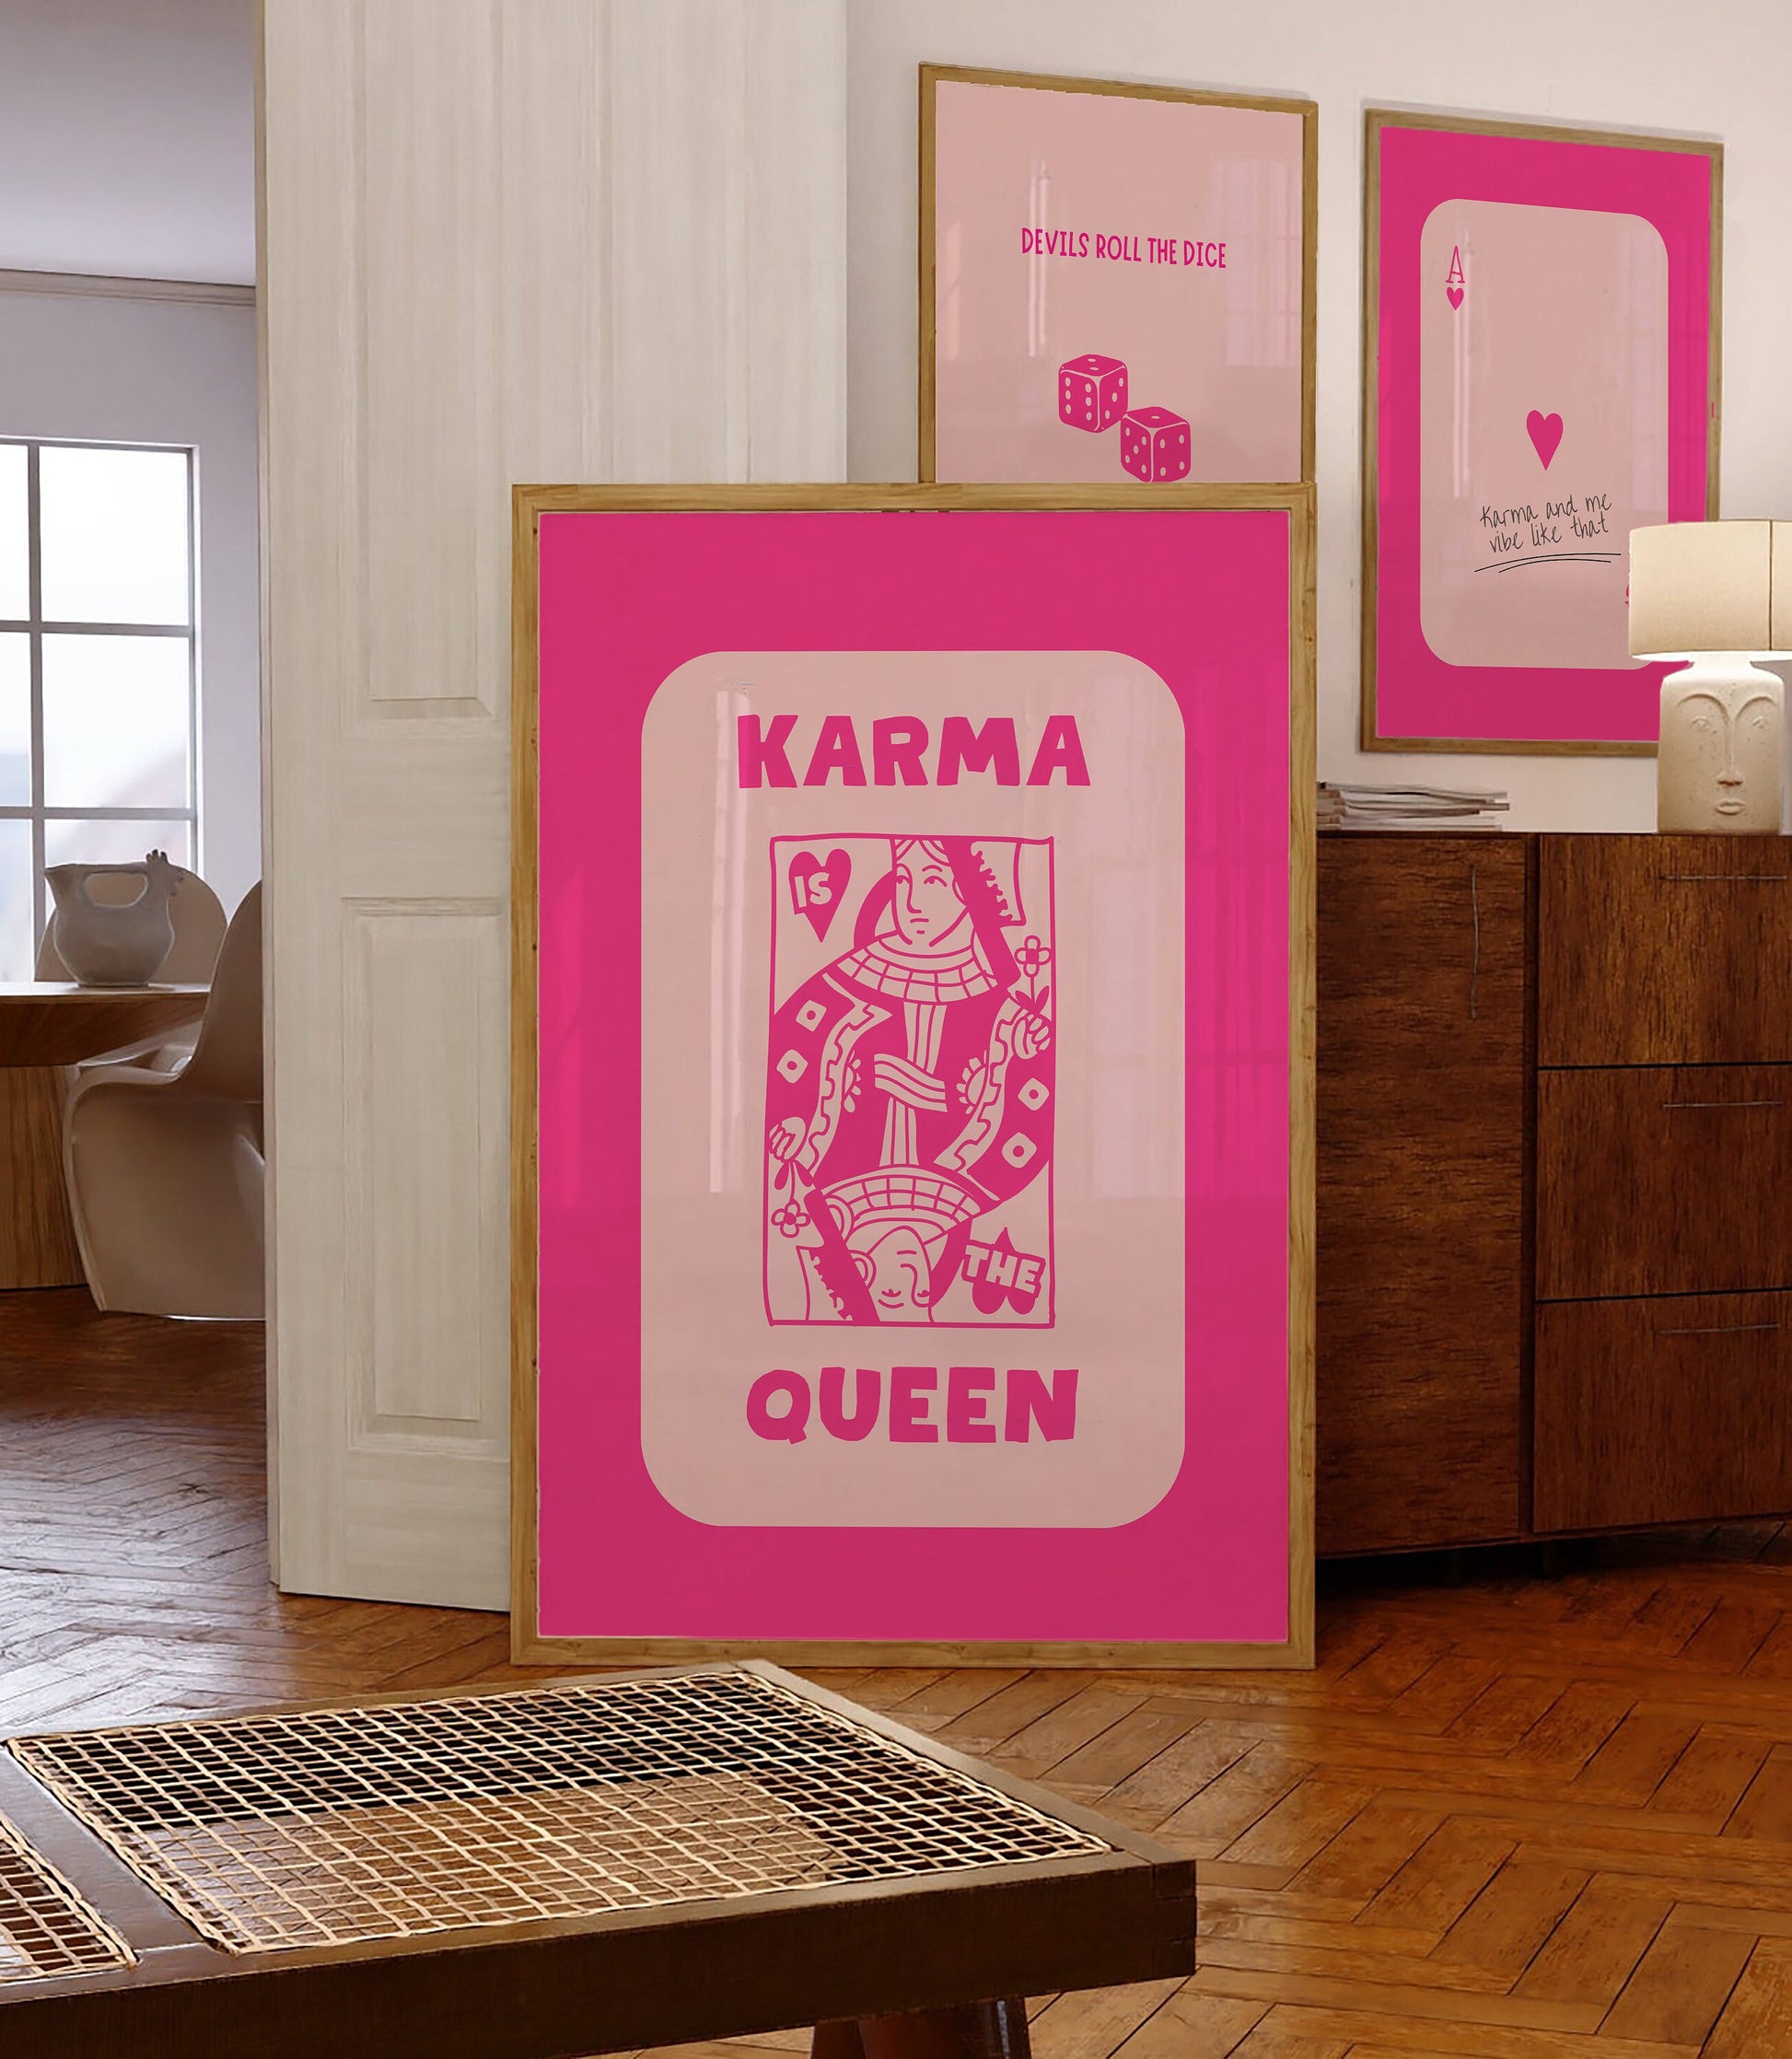 Pink Taylor poster, pink swifti posters, karma is the queen, devils roll the dice angels roll their eyes poster, karma lyric posters, gift